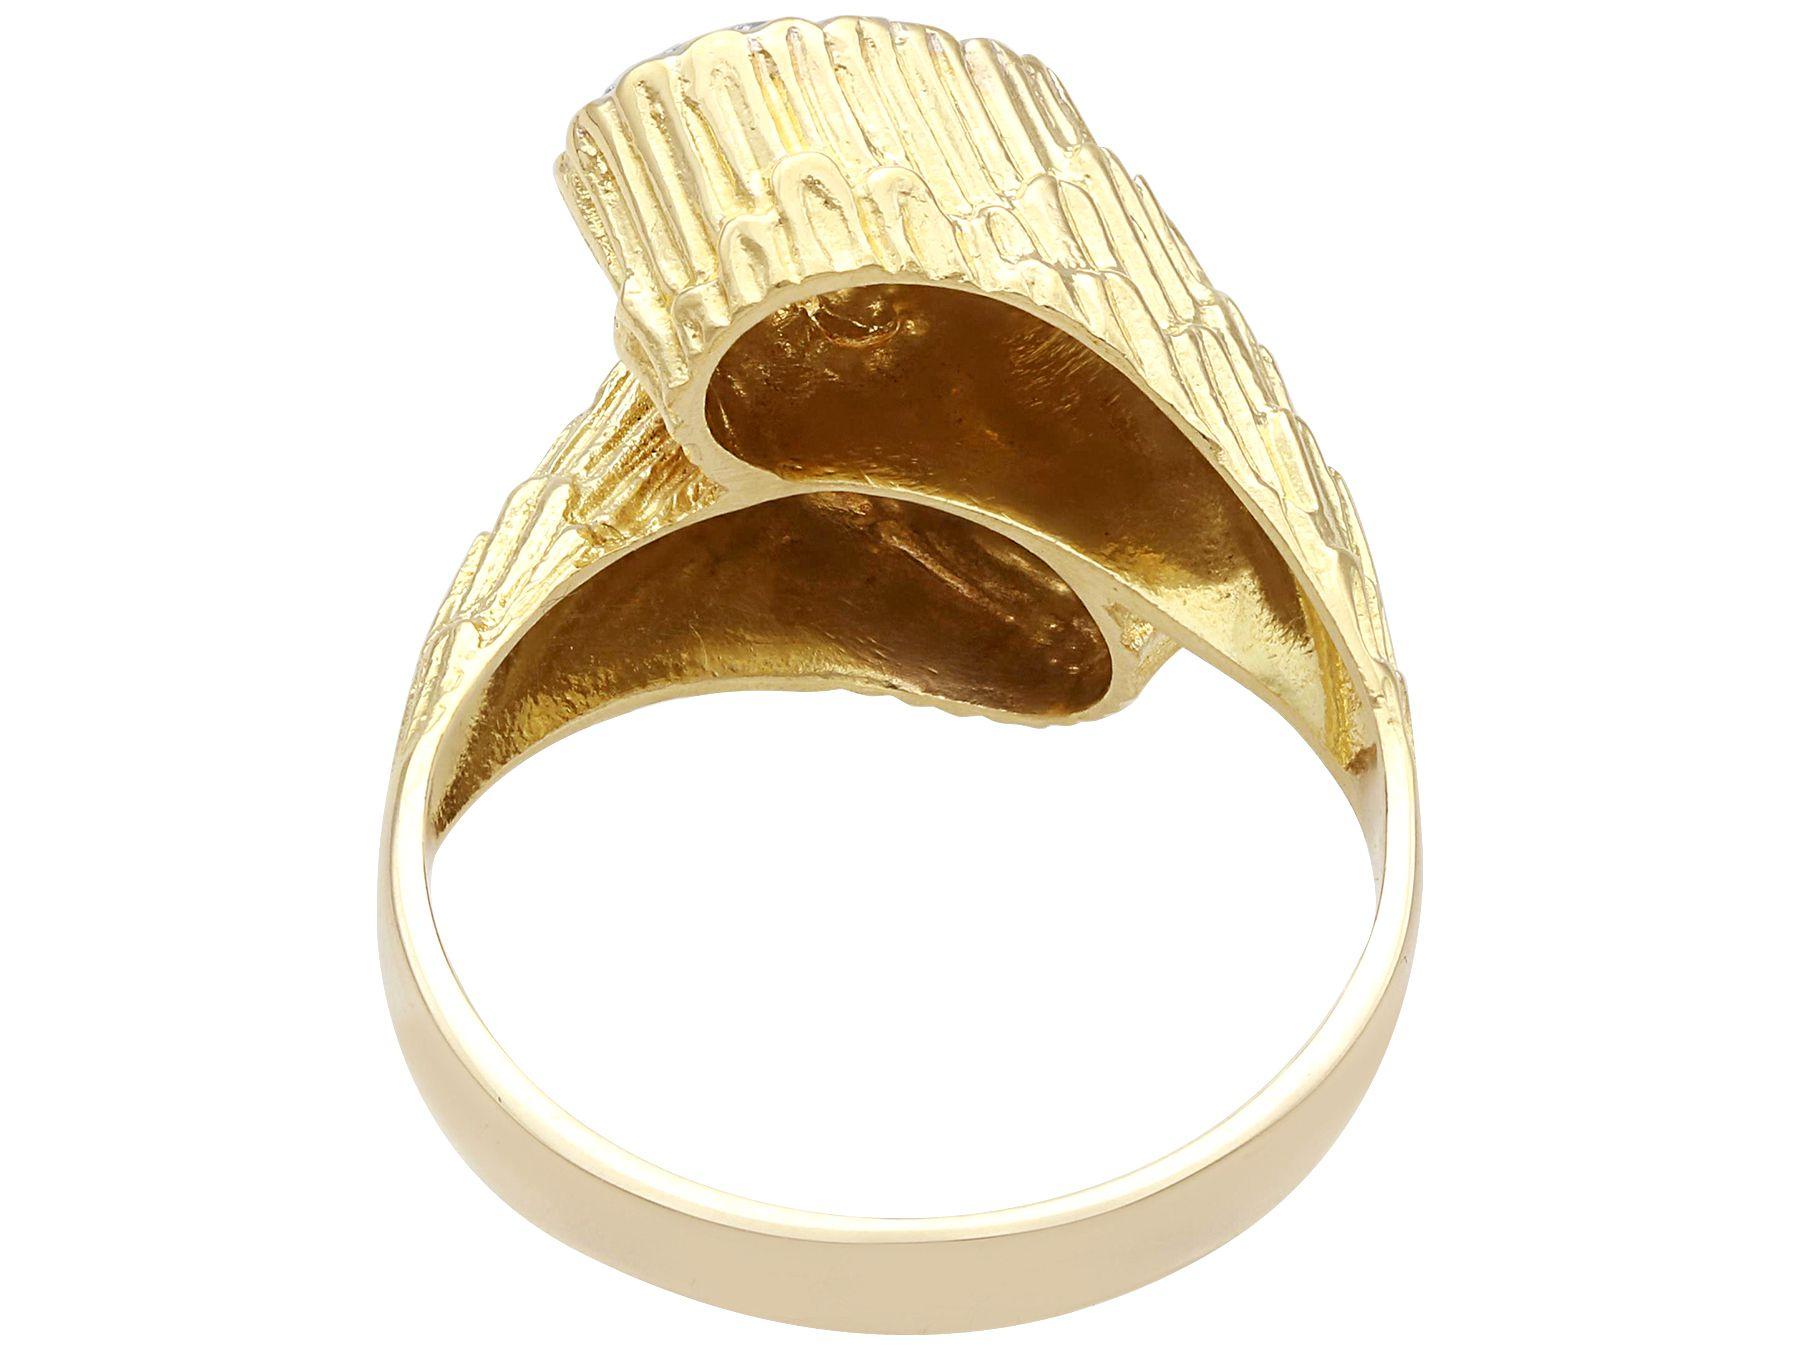 Vintage 0.83 Carat Diamond and 18K Yellow Gold Twist Ring In Excellent Condition For Sale In Jesmond, Newcastle Upon Tyne